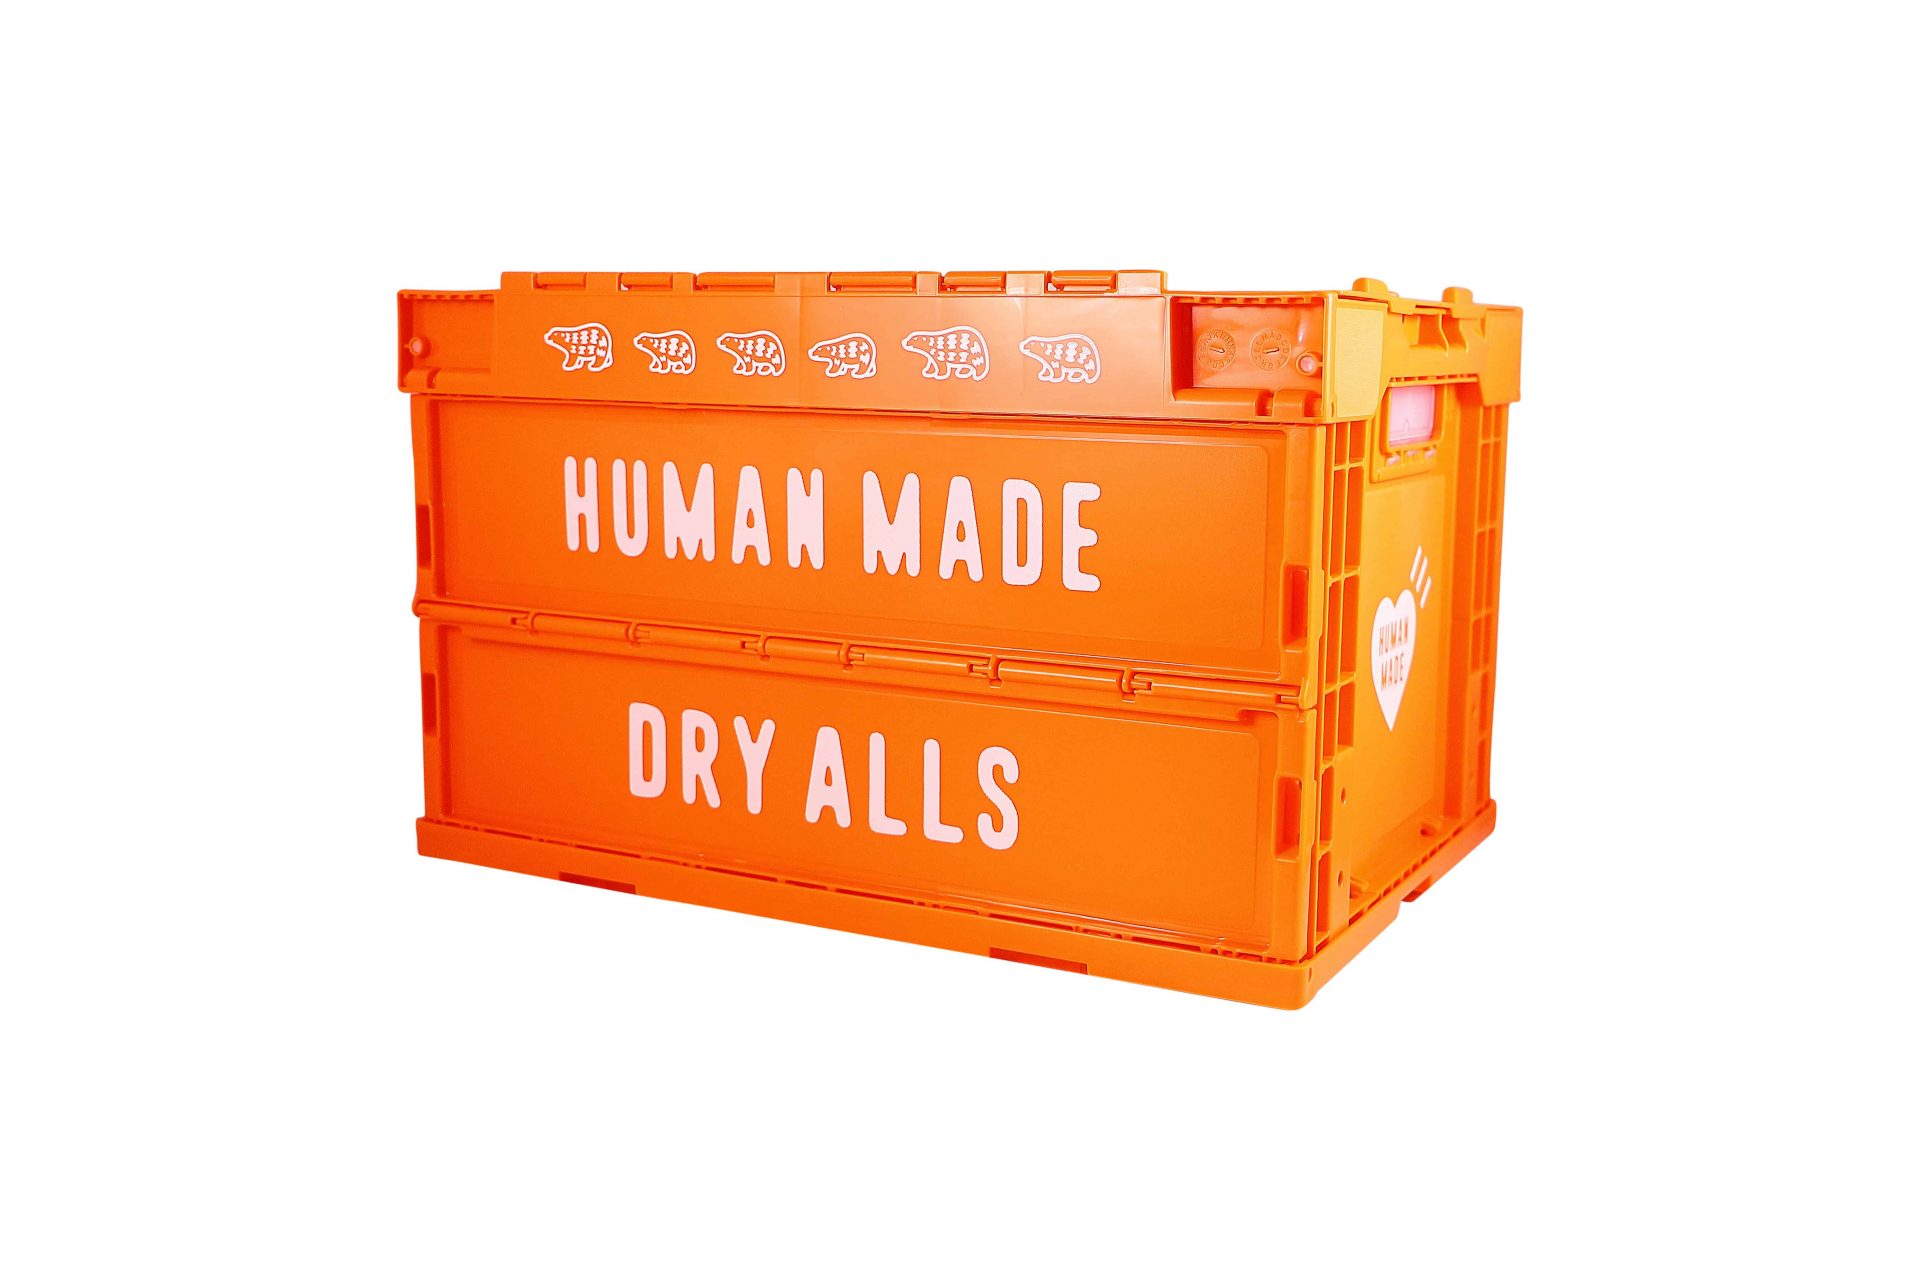 Human Made Dry Alls 50L Orange Storage Crate Container